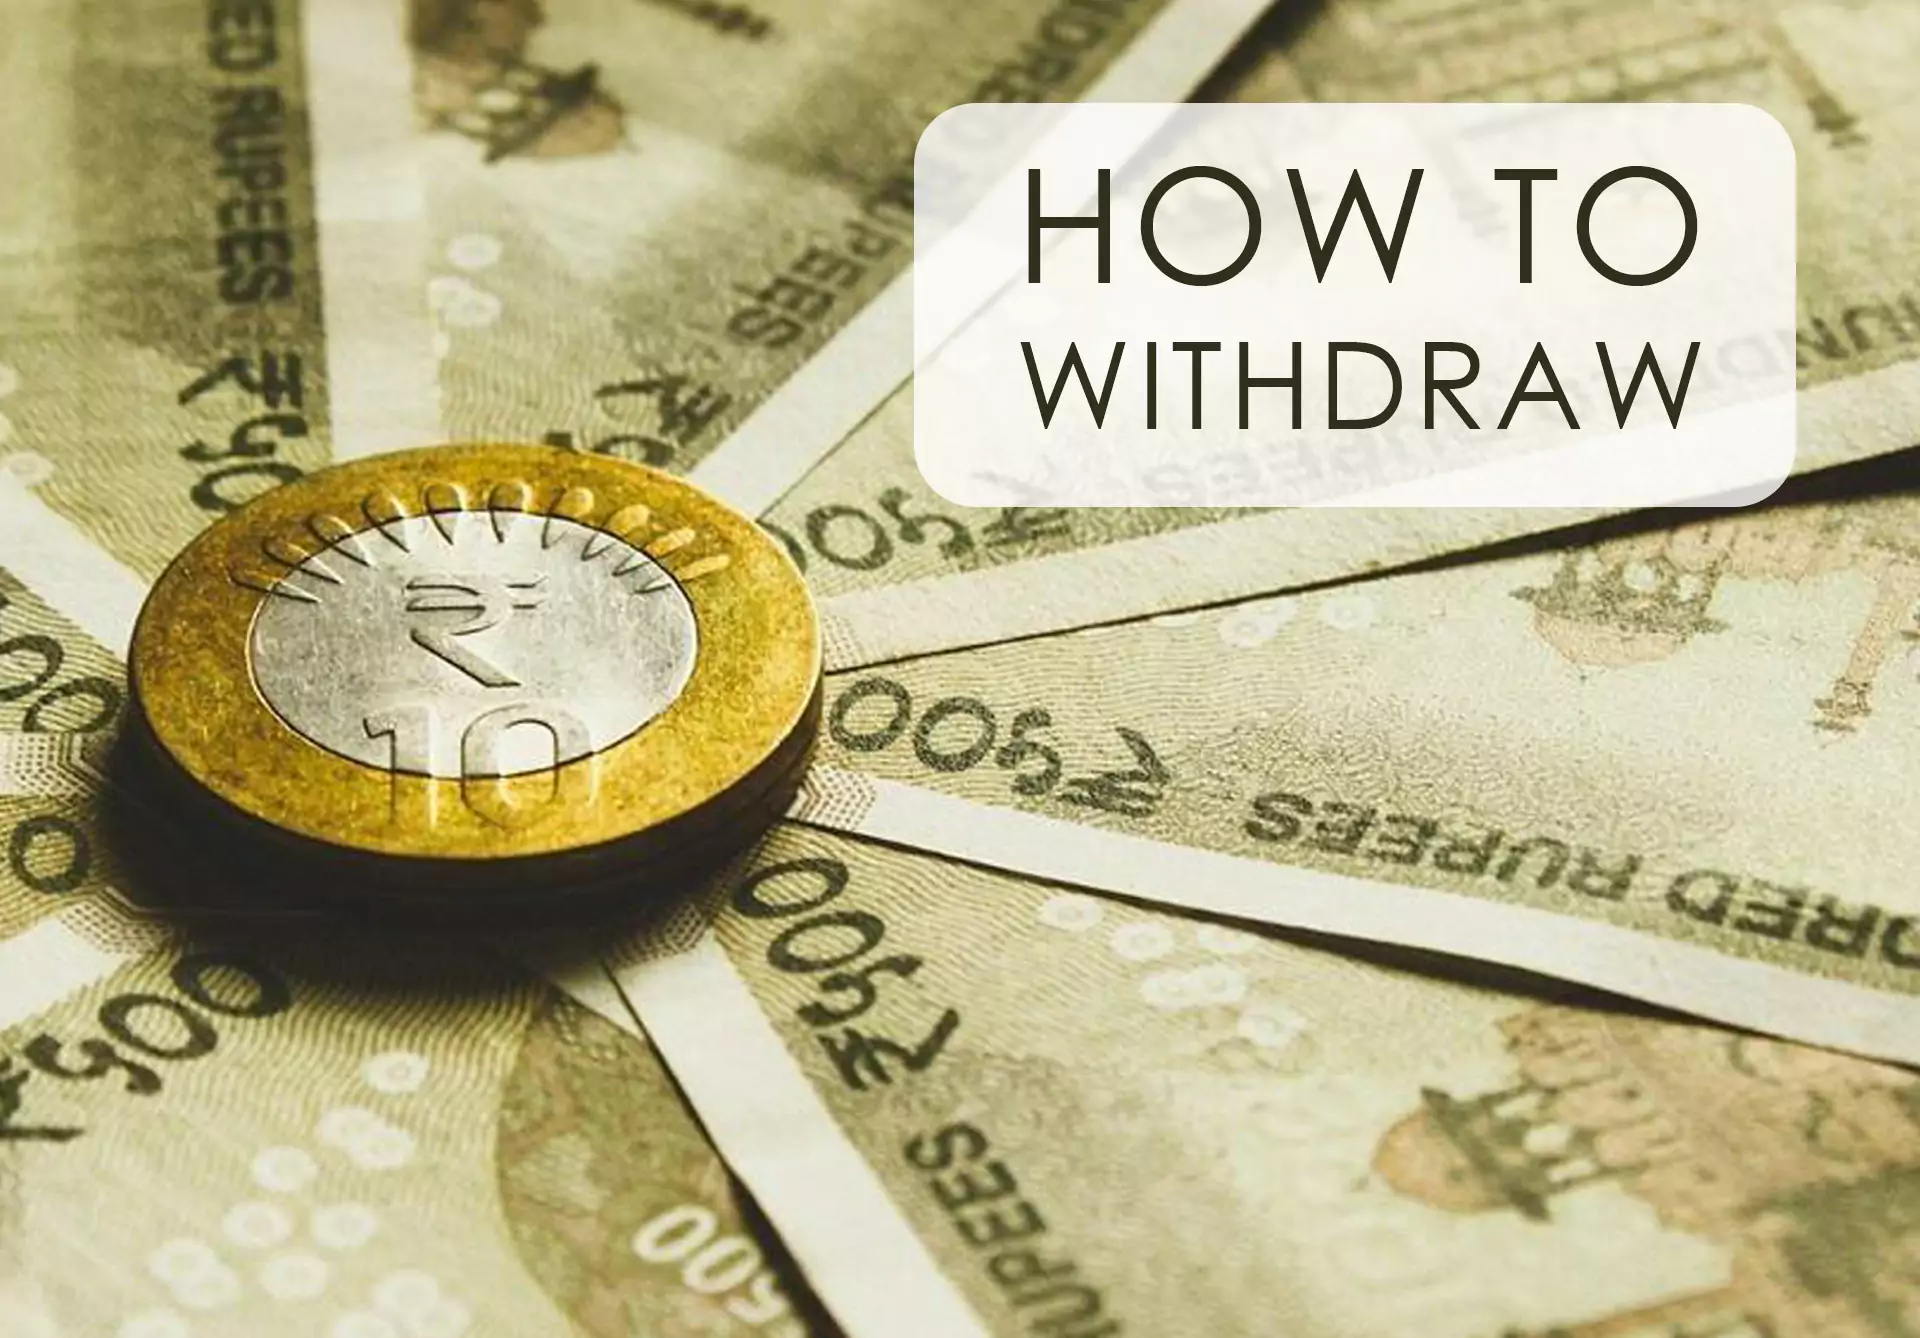 After your bet wins, withdraw money to any payment system you want.